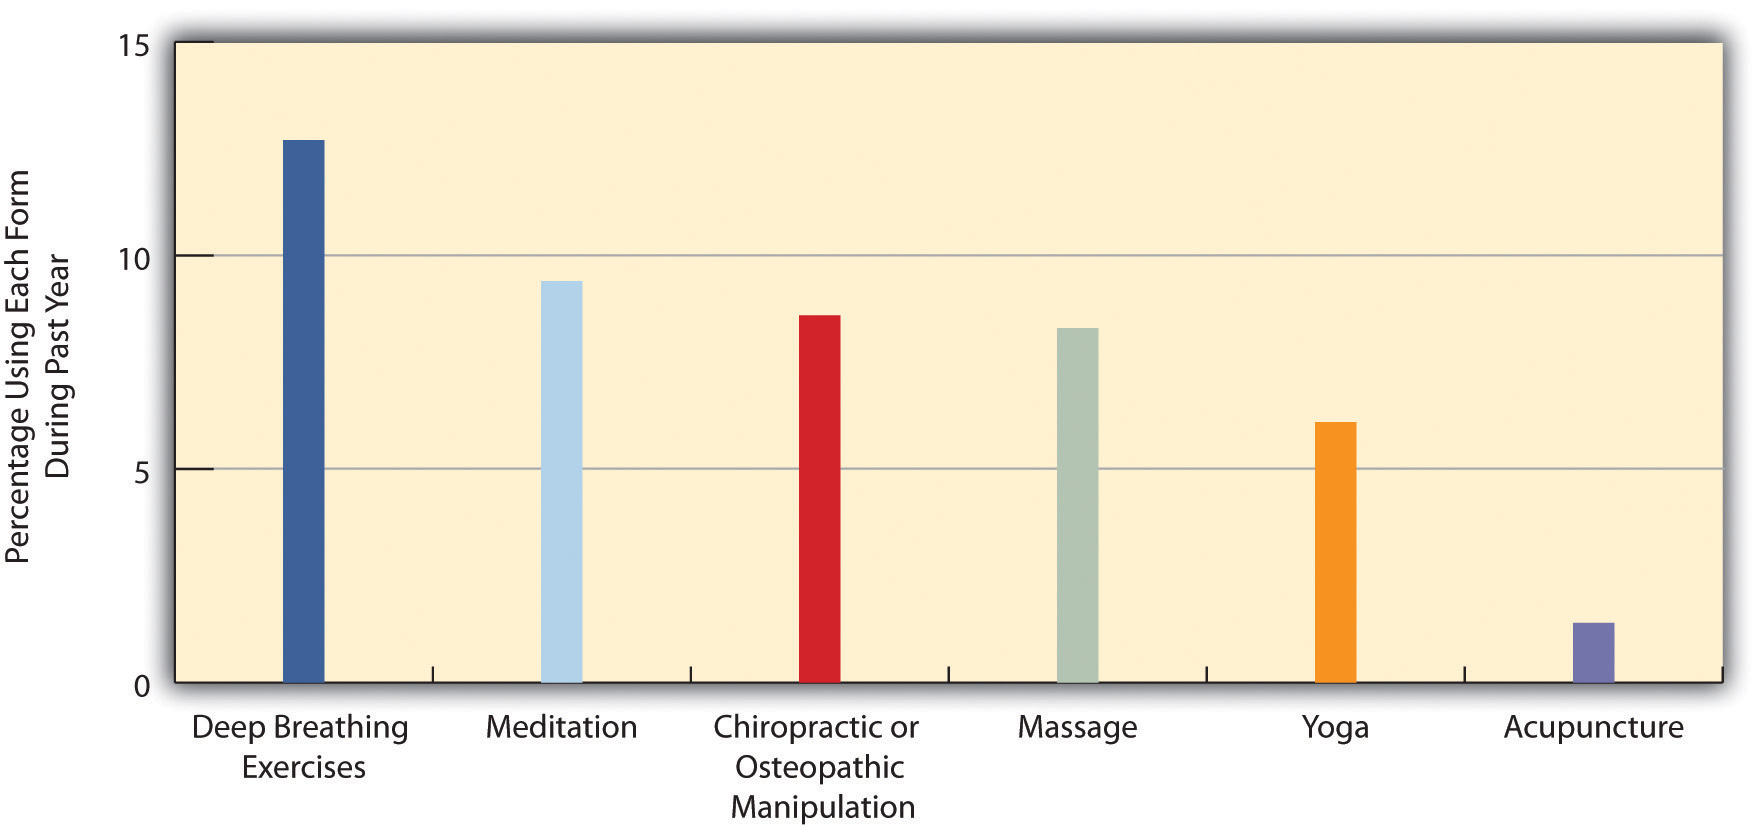 Use of selected forms of complementary and alternative medicine (CAM), 2007 (Percentage of US adults using each form during past year)